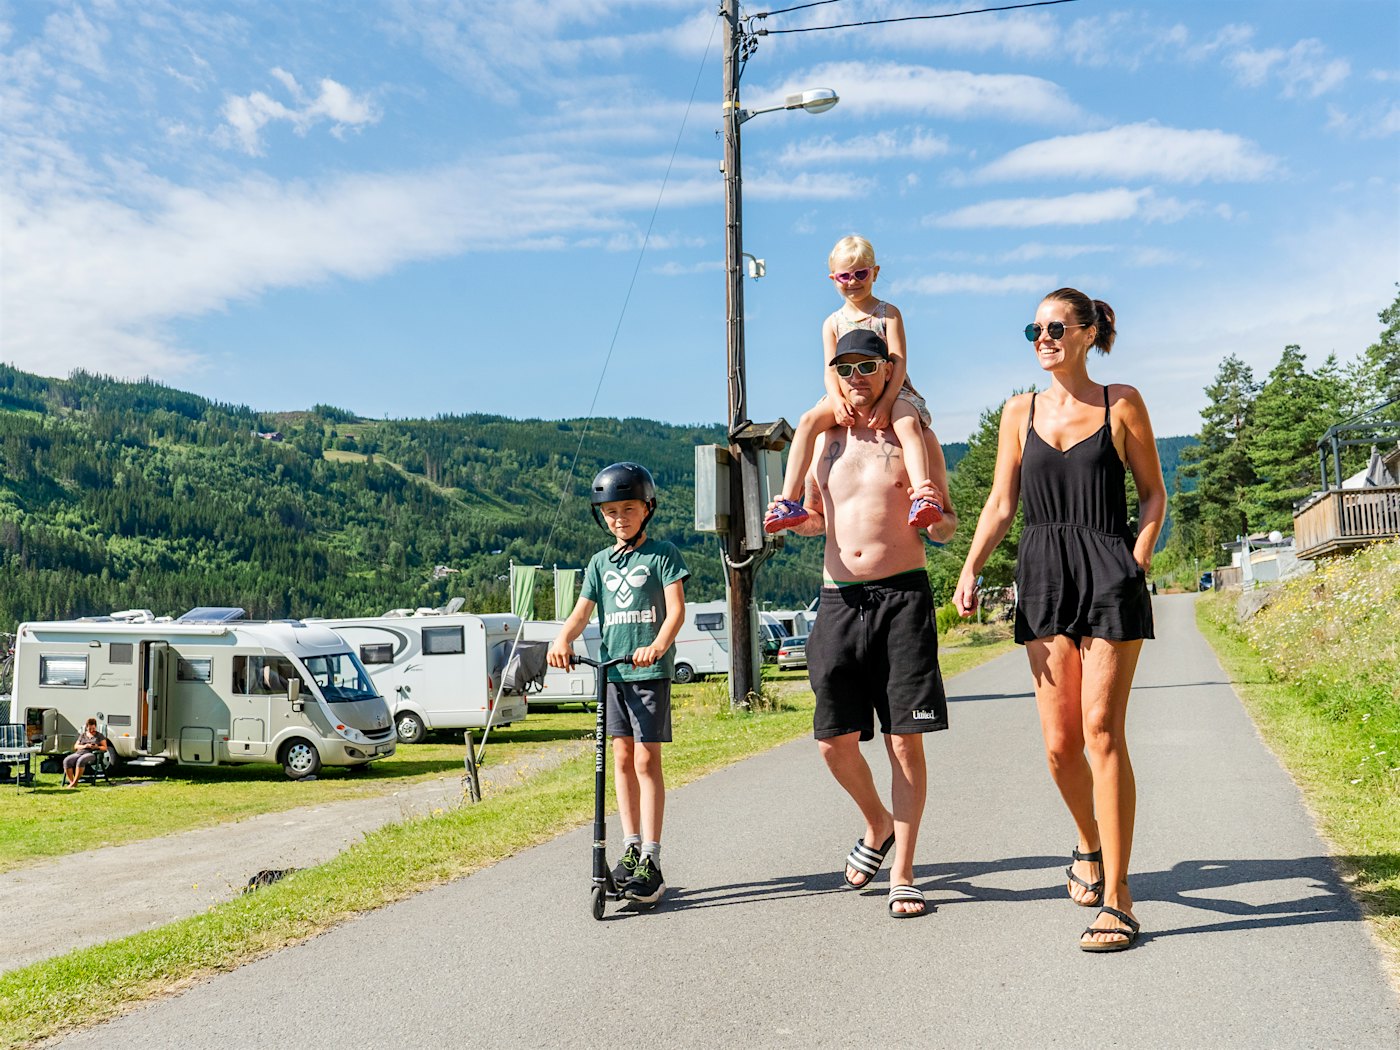 Family strolls across campsite while smiling, girl sits on father's shoulders and boy stands on scooter. Photo